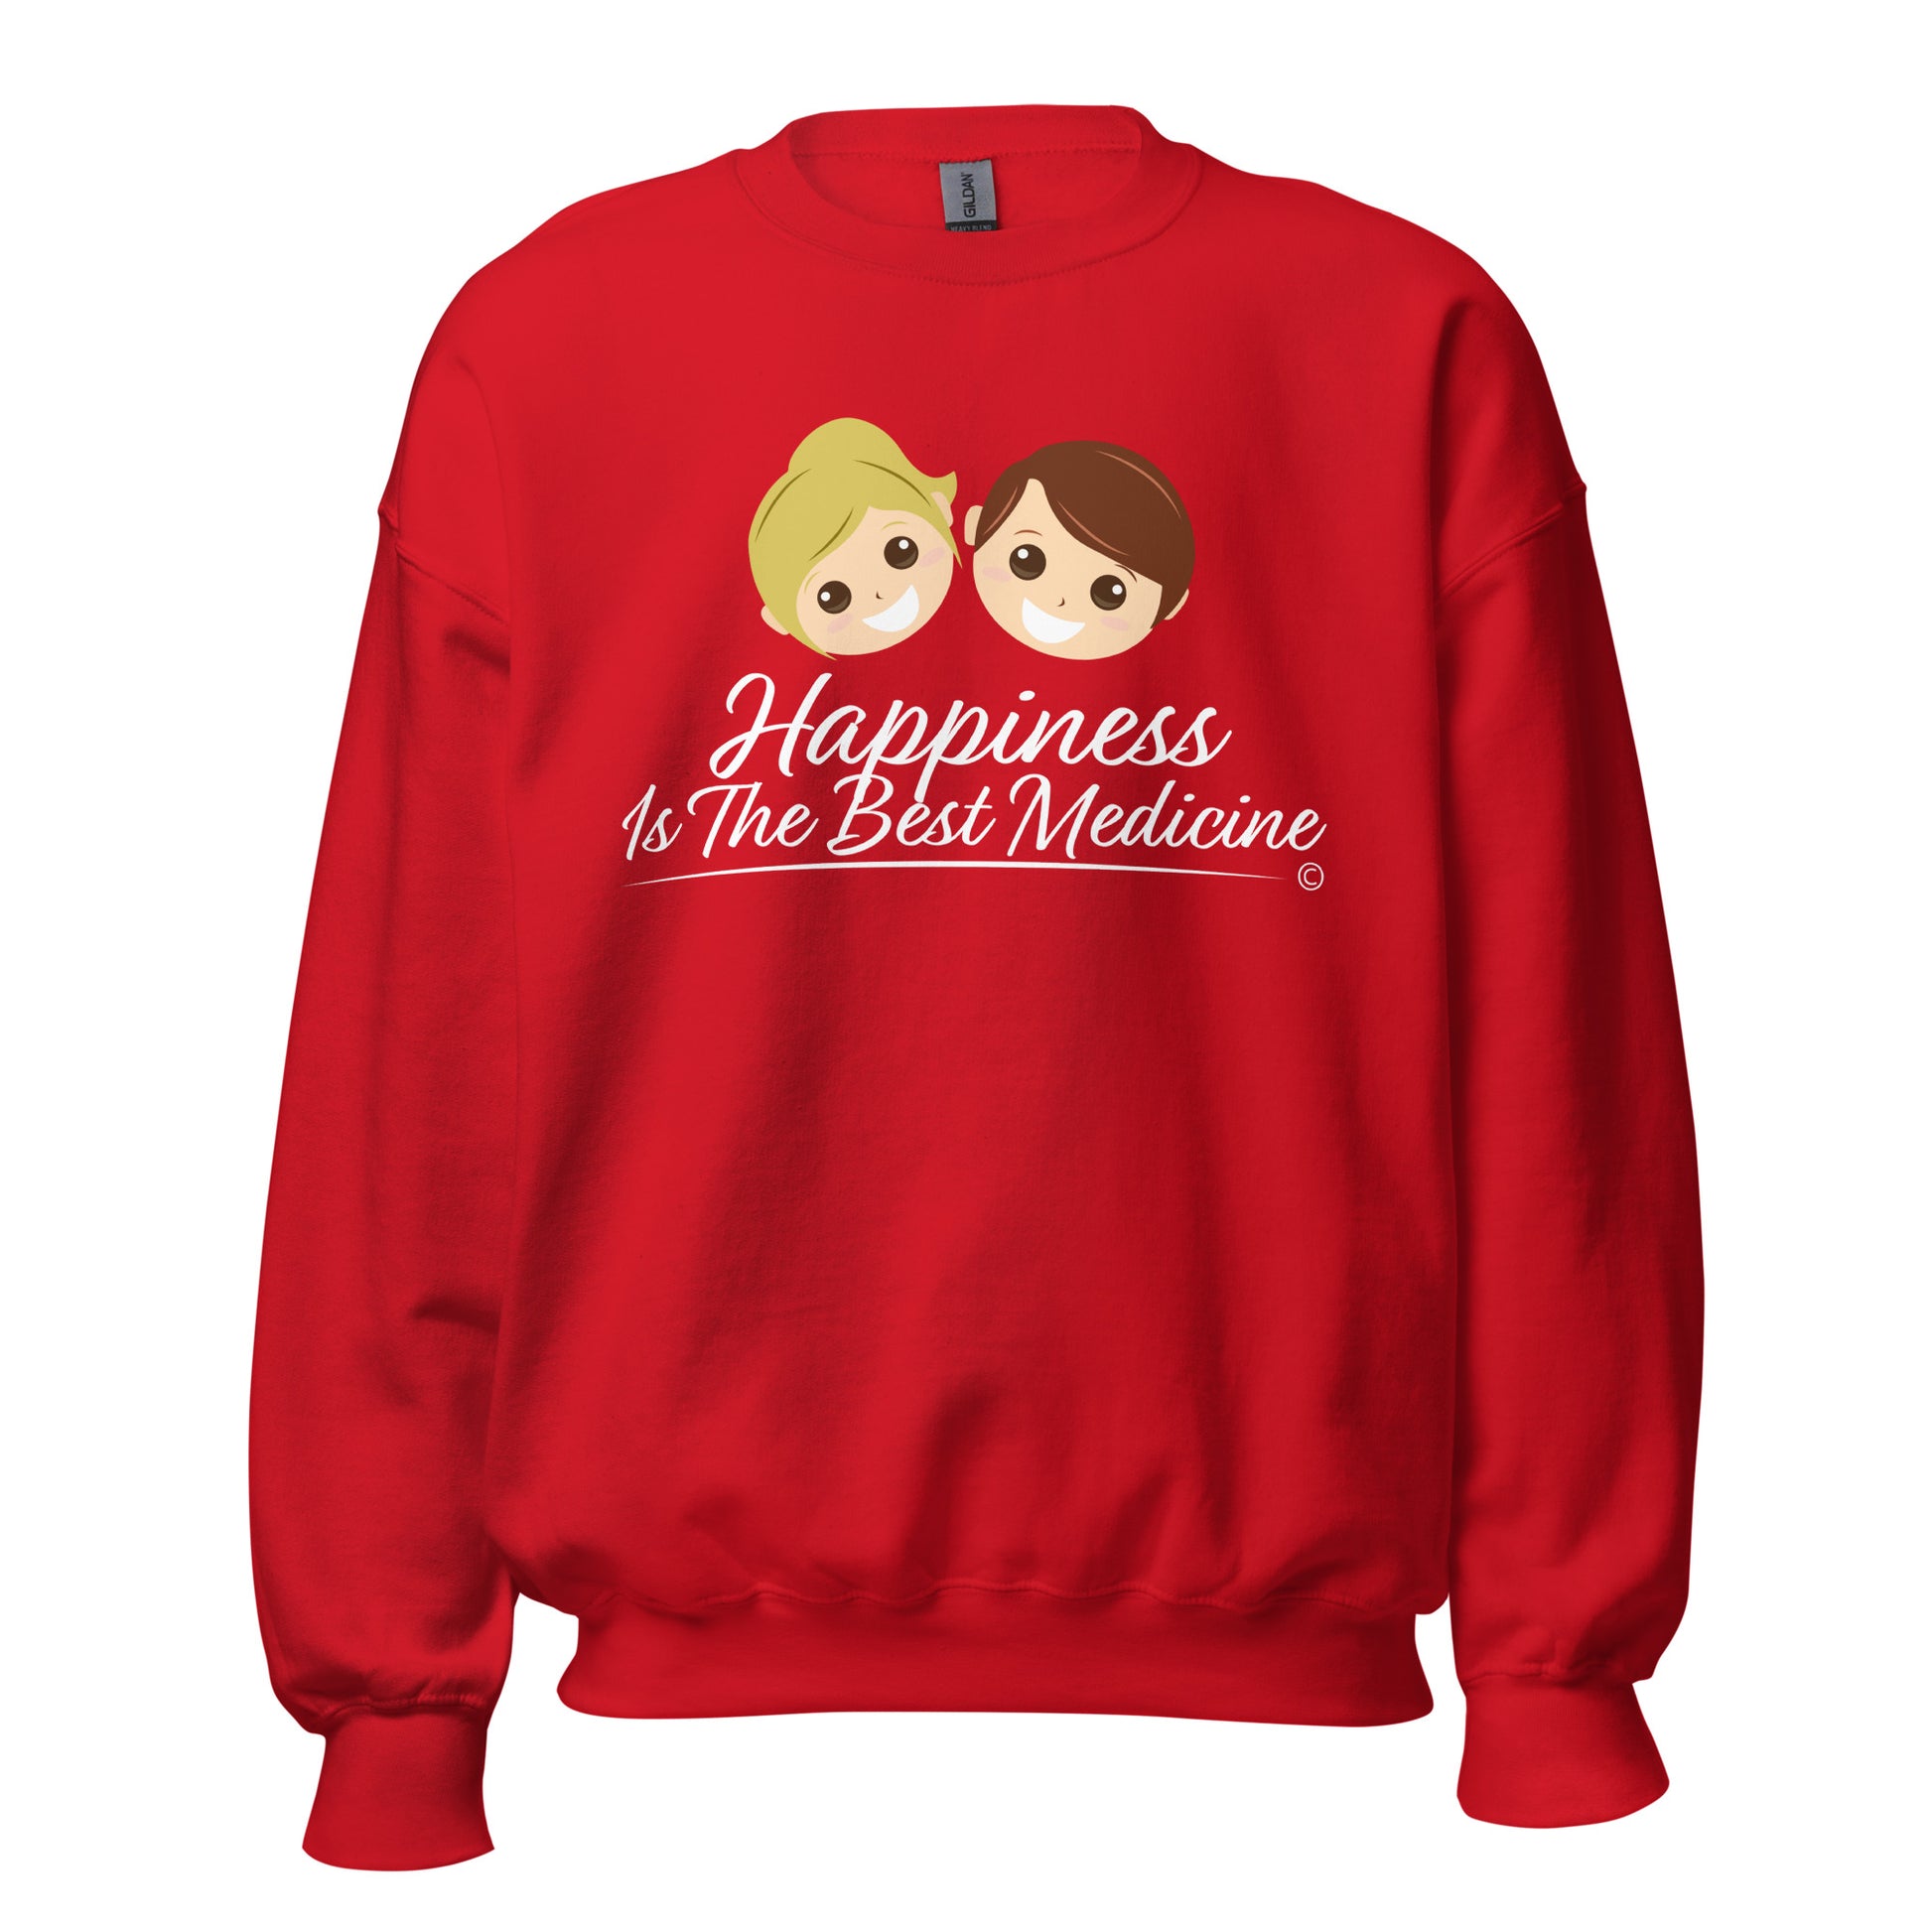 Soft and cozy sweatshirt for all-Red